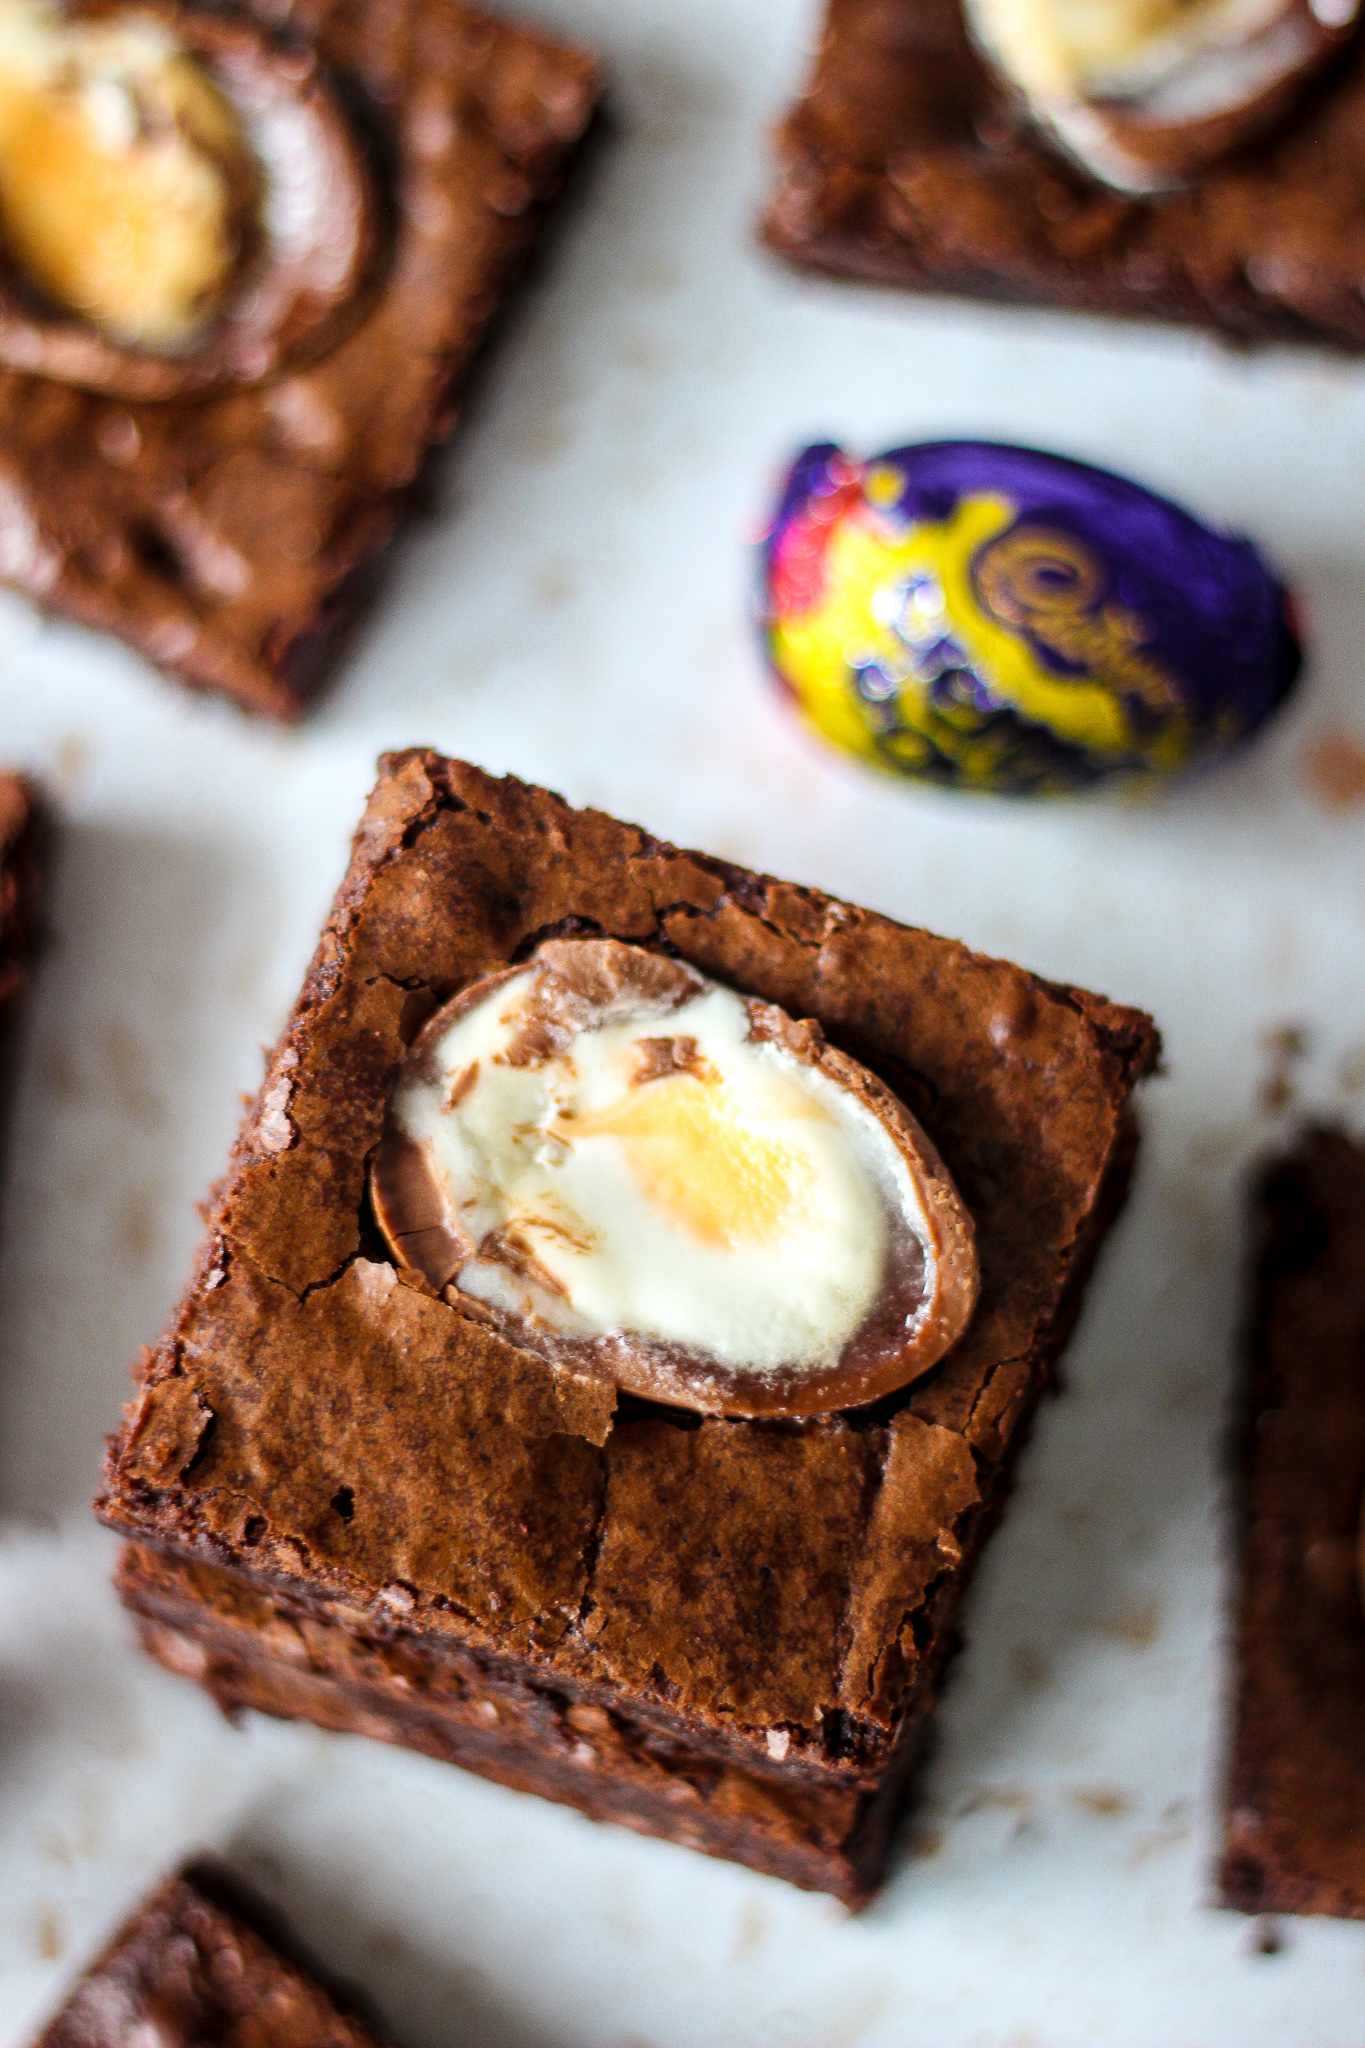 view from above of chewy creme egg brownie on top of stack of brownies. Creme Egg and other brownie slices blurred in background.